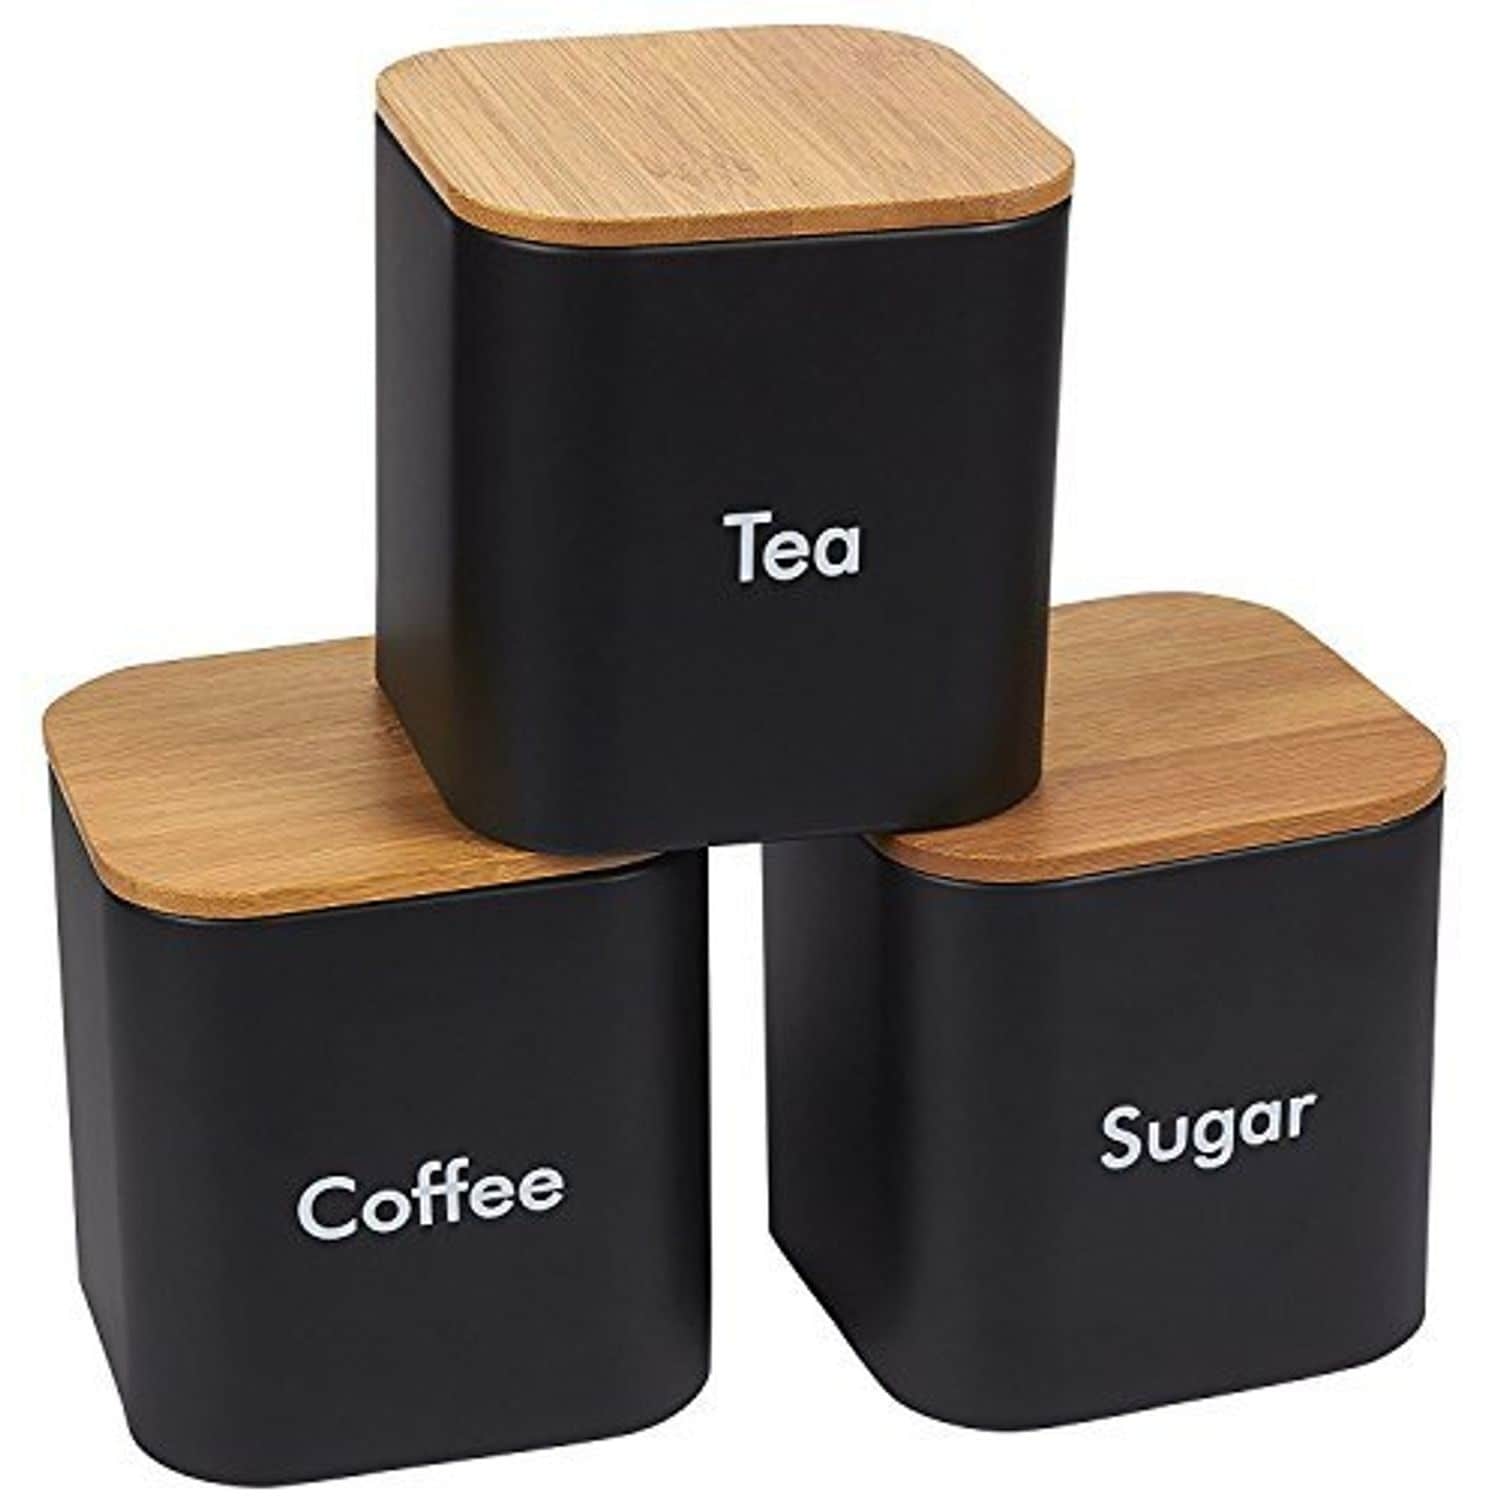 x 14cm x 14cm H 3PC Tea D W Sugar & Coffee Canister Set MATT Black 15cm Conical Shaped Metal Kitchen Storage Canisters with Bamboo Lids 